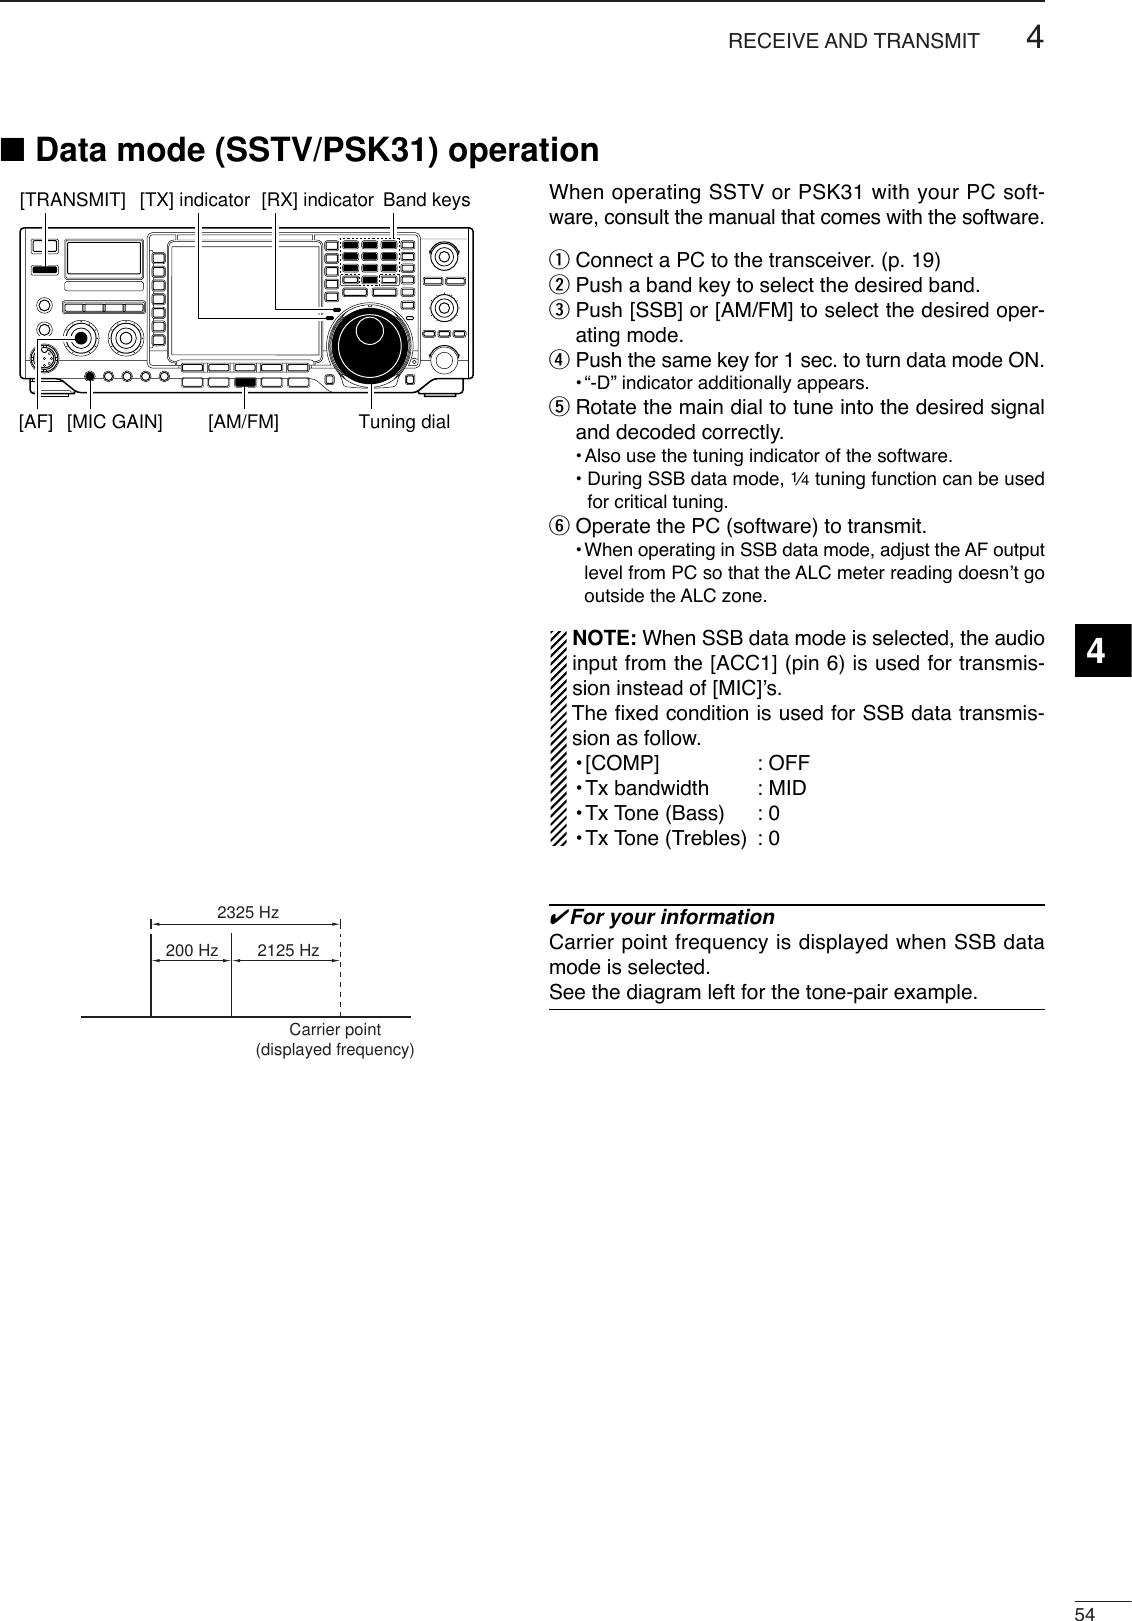 544RECEIVE AND TRANSMIT■Data mode (SSTV/PSK31) operation4When operating SSTV or PSK31 with your PC soft-ware, consult the manual that comes with the software.qConnect a PC to the transceiver. (p. 19)wPush a band key to select the desired band.ePush [SSB] or [AM/FM] to select the desired oper-ating mode.rPush the same key for 1 sec. to turn data mode ON.•“-D” indicator additionally appears.tRotate the main dial to tune into the desired signaland decoded correctly.•Also use the tuning indicator of the software.• During SSB data mode, 1⁄4tuning function can be usedfor critical tuning.yOperate the PC (software) to transmit.•When operating in SSB data mode, adjust the AF outputlevel from PC so that the ALC meter reading doesn’t gooutside the ALC zone.NOTE: When SSB data mode is selected, the audioinput from the [ACC1] (pin 6) is used for transmis-sion instead of [MIC]’s.The ﬁxed condition is used for SSB data transmis-sion as follow.•[COMP] : OFF•Tx bandwidth : MID•Tx Tone (Bass) : 0•Tx Tone (Trebles) : 0✔For your informationCarrier point frequency is displayed when SSB datamode is selected.See the diagram left for the tone-pair example.200 Hz 2125 Hz2325 HzCarrier point(displayed frequency)[TRANSMIT][AM/FM][AF] [MIC GAIN] Tuning dial[TX] indicator [RX] indicator Band keys